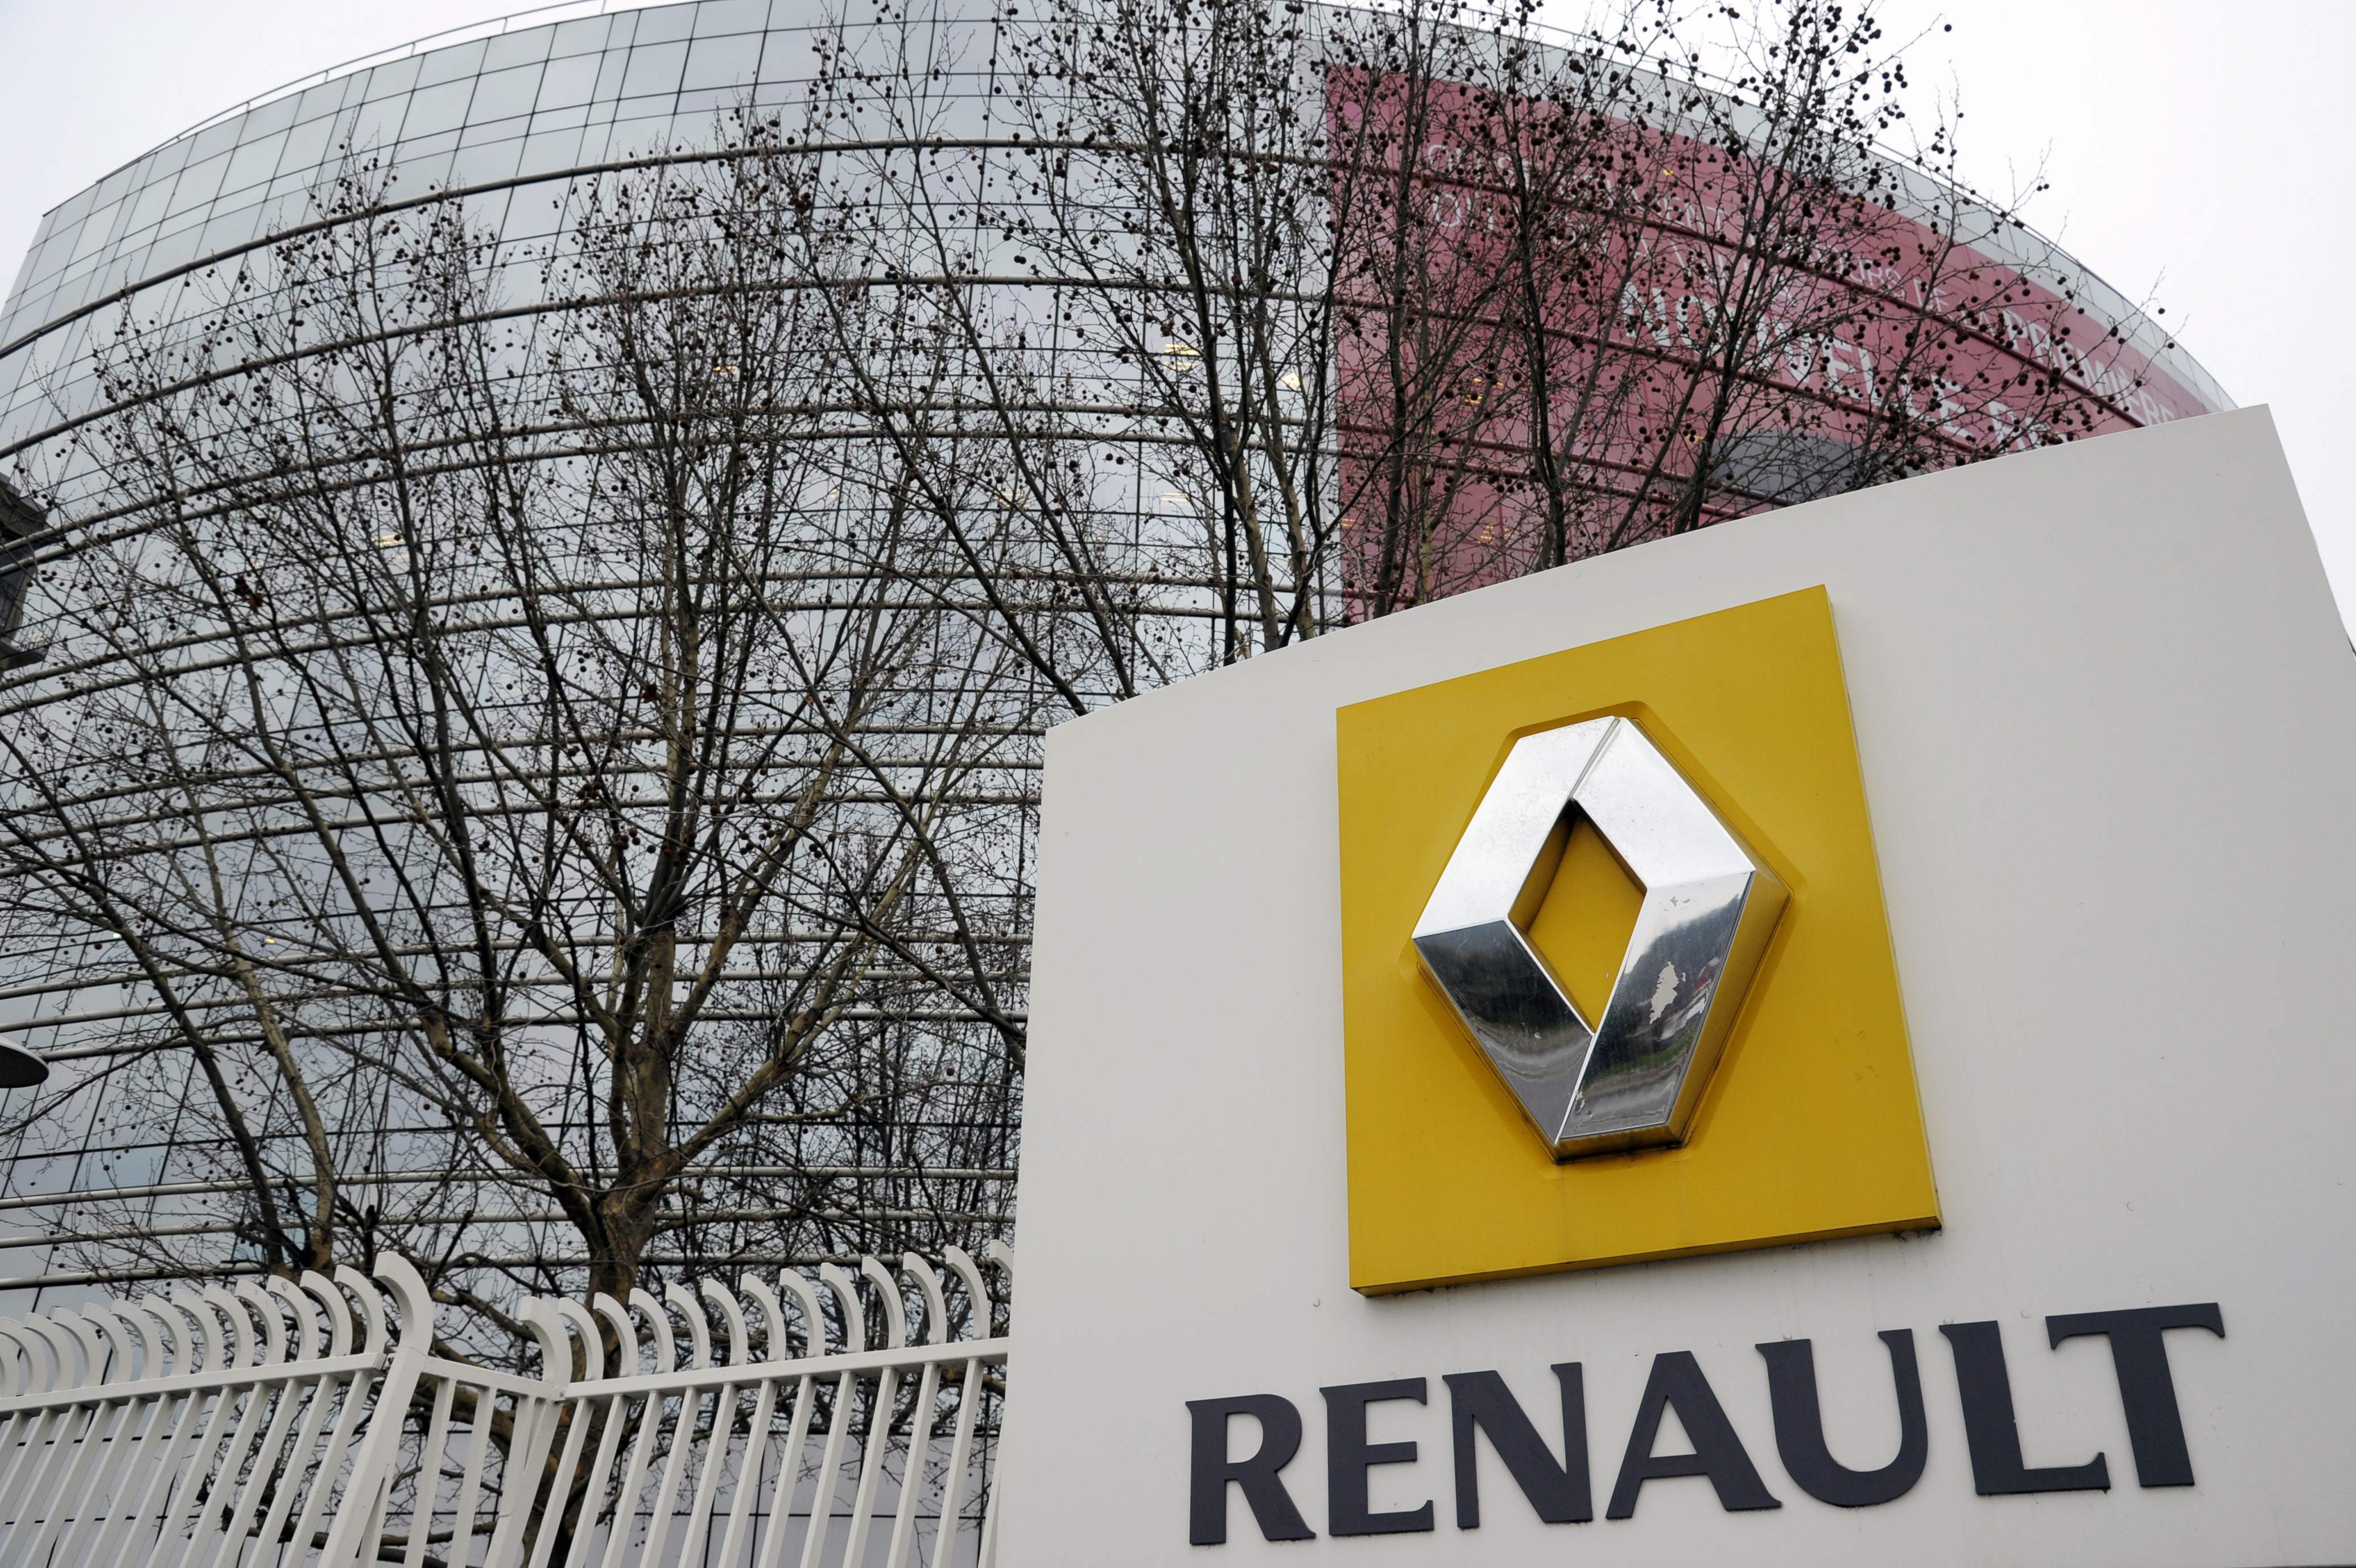 IKCO-Renault Deal Clouded by Uncertainty